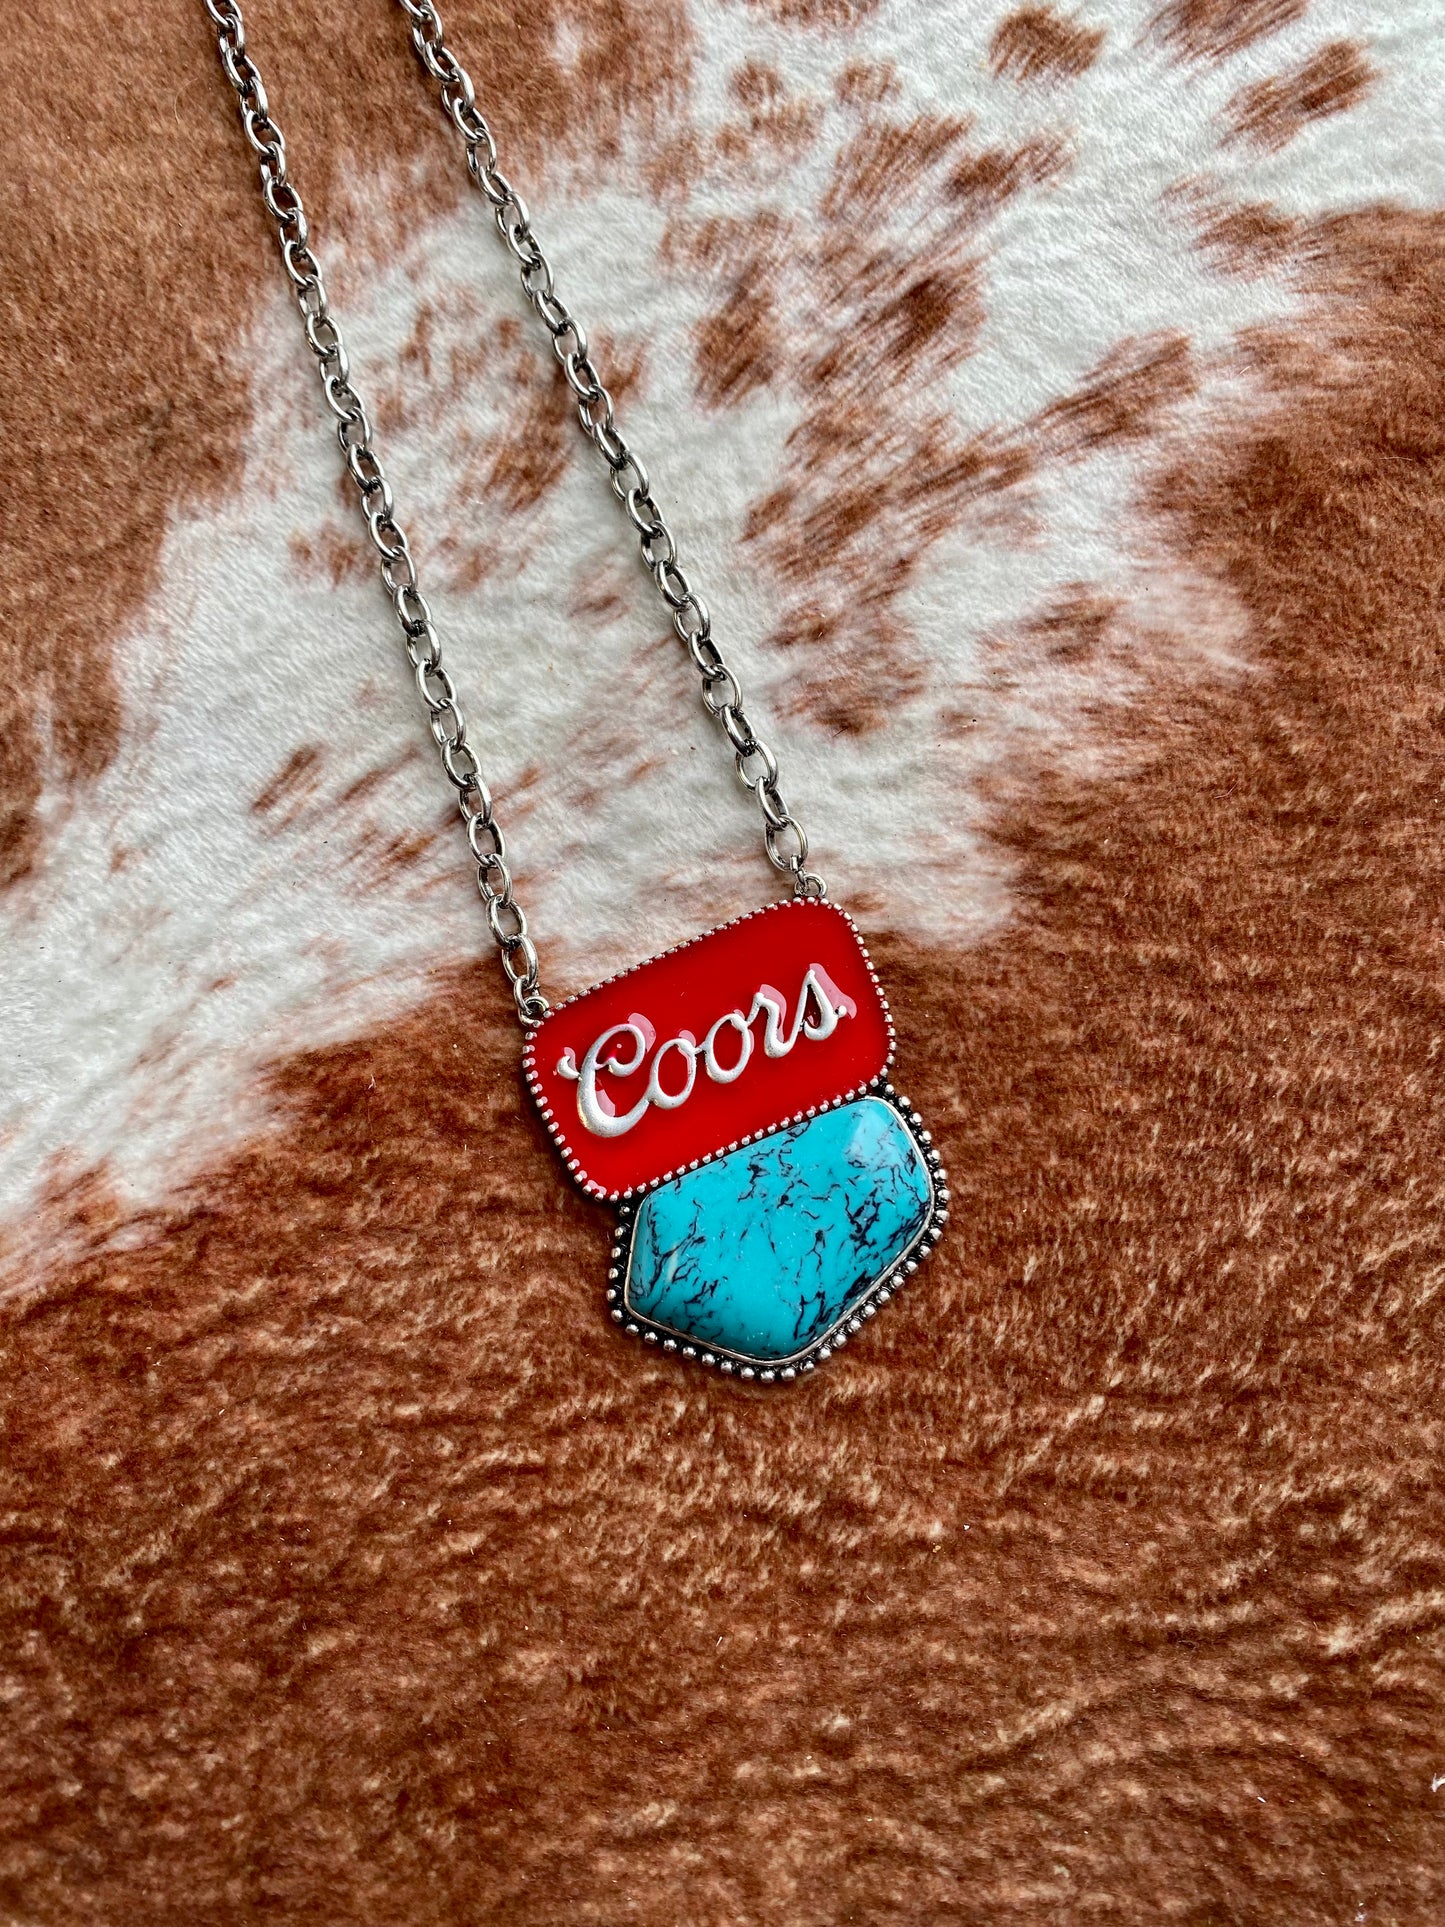 Coors Stone Necklace